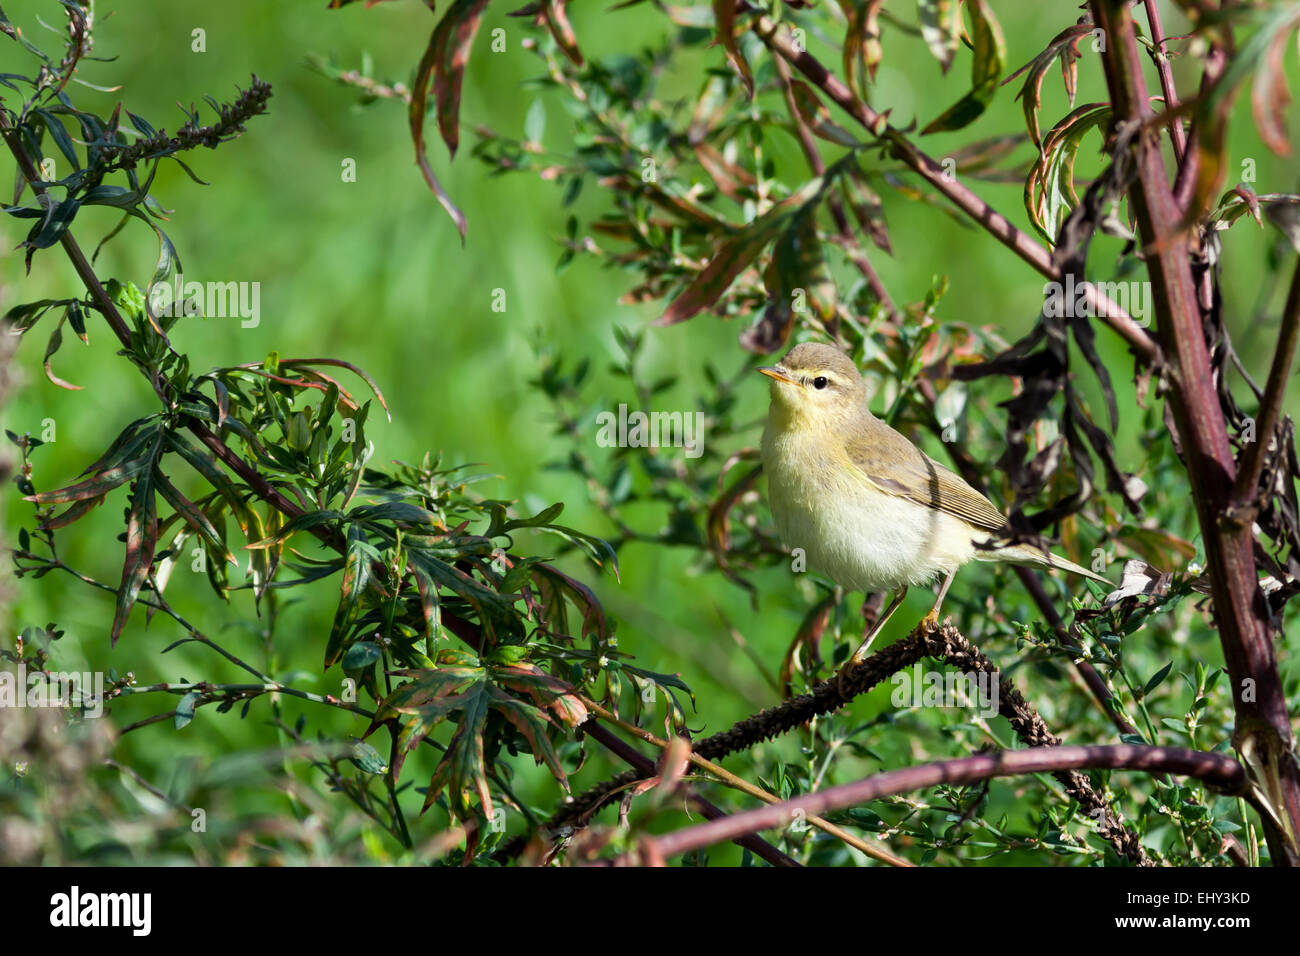 Leaf warbler (Willow Warbler?) (Phylloscopus sp). Timirjazevsky park, Moscow. Russia. Stock Photo